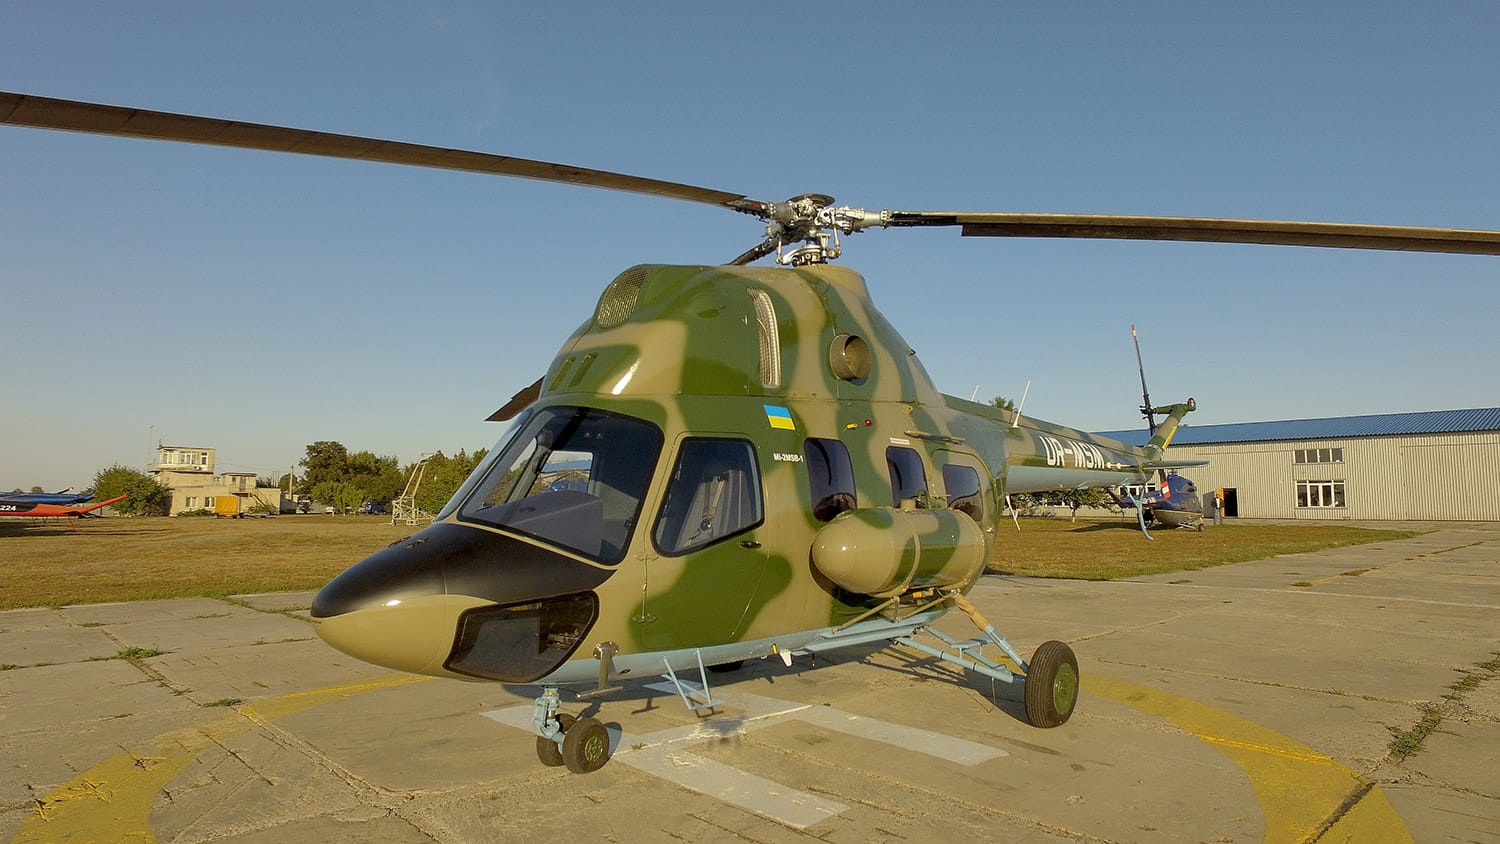 Betrayal unveiled: journalists expose “helicopter king’s” moves to undermine Ukrainian Army